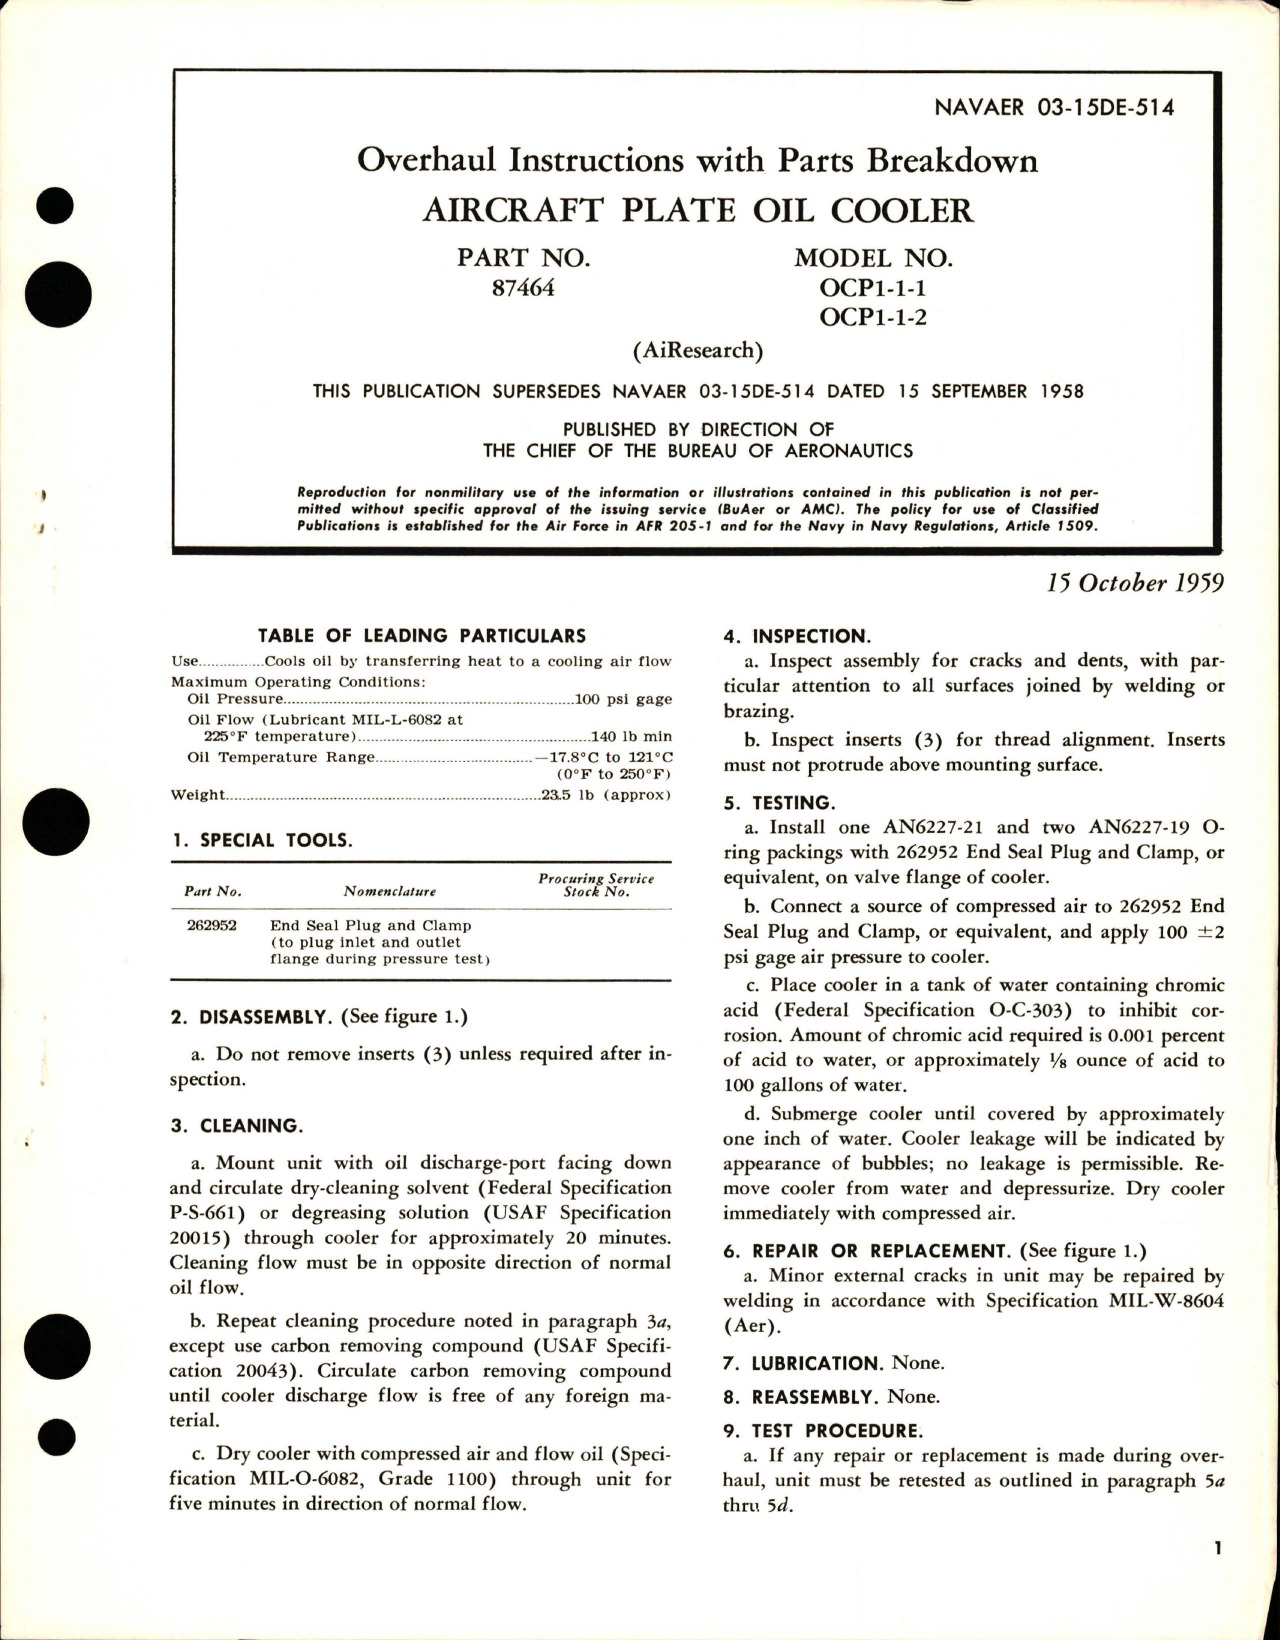 Sample page 1 from AirCorps Library document: Overhaul Instructions with Parts for Aircraft Plate Oil Cooler - Part 87464 - Models OCP1-1-1 and OCP1-1-2